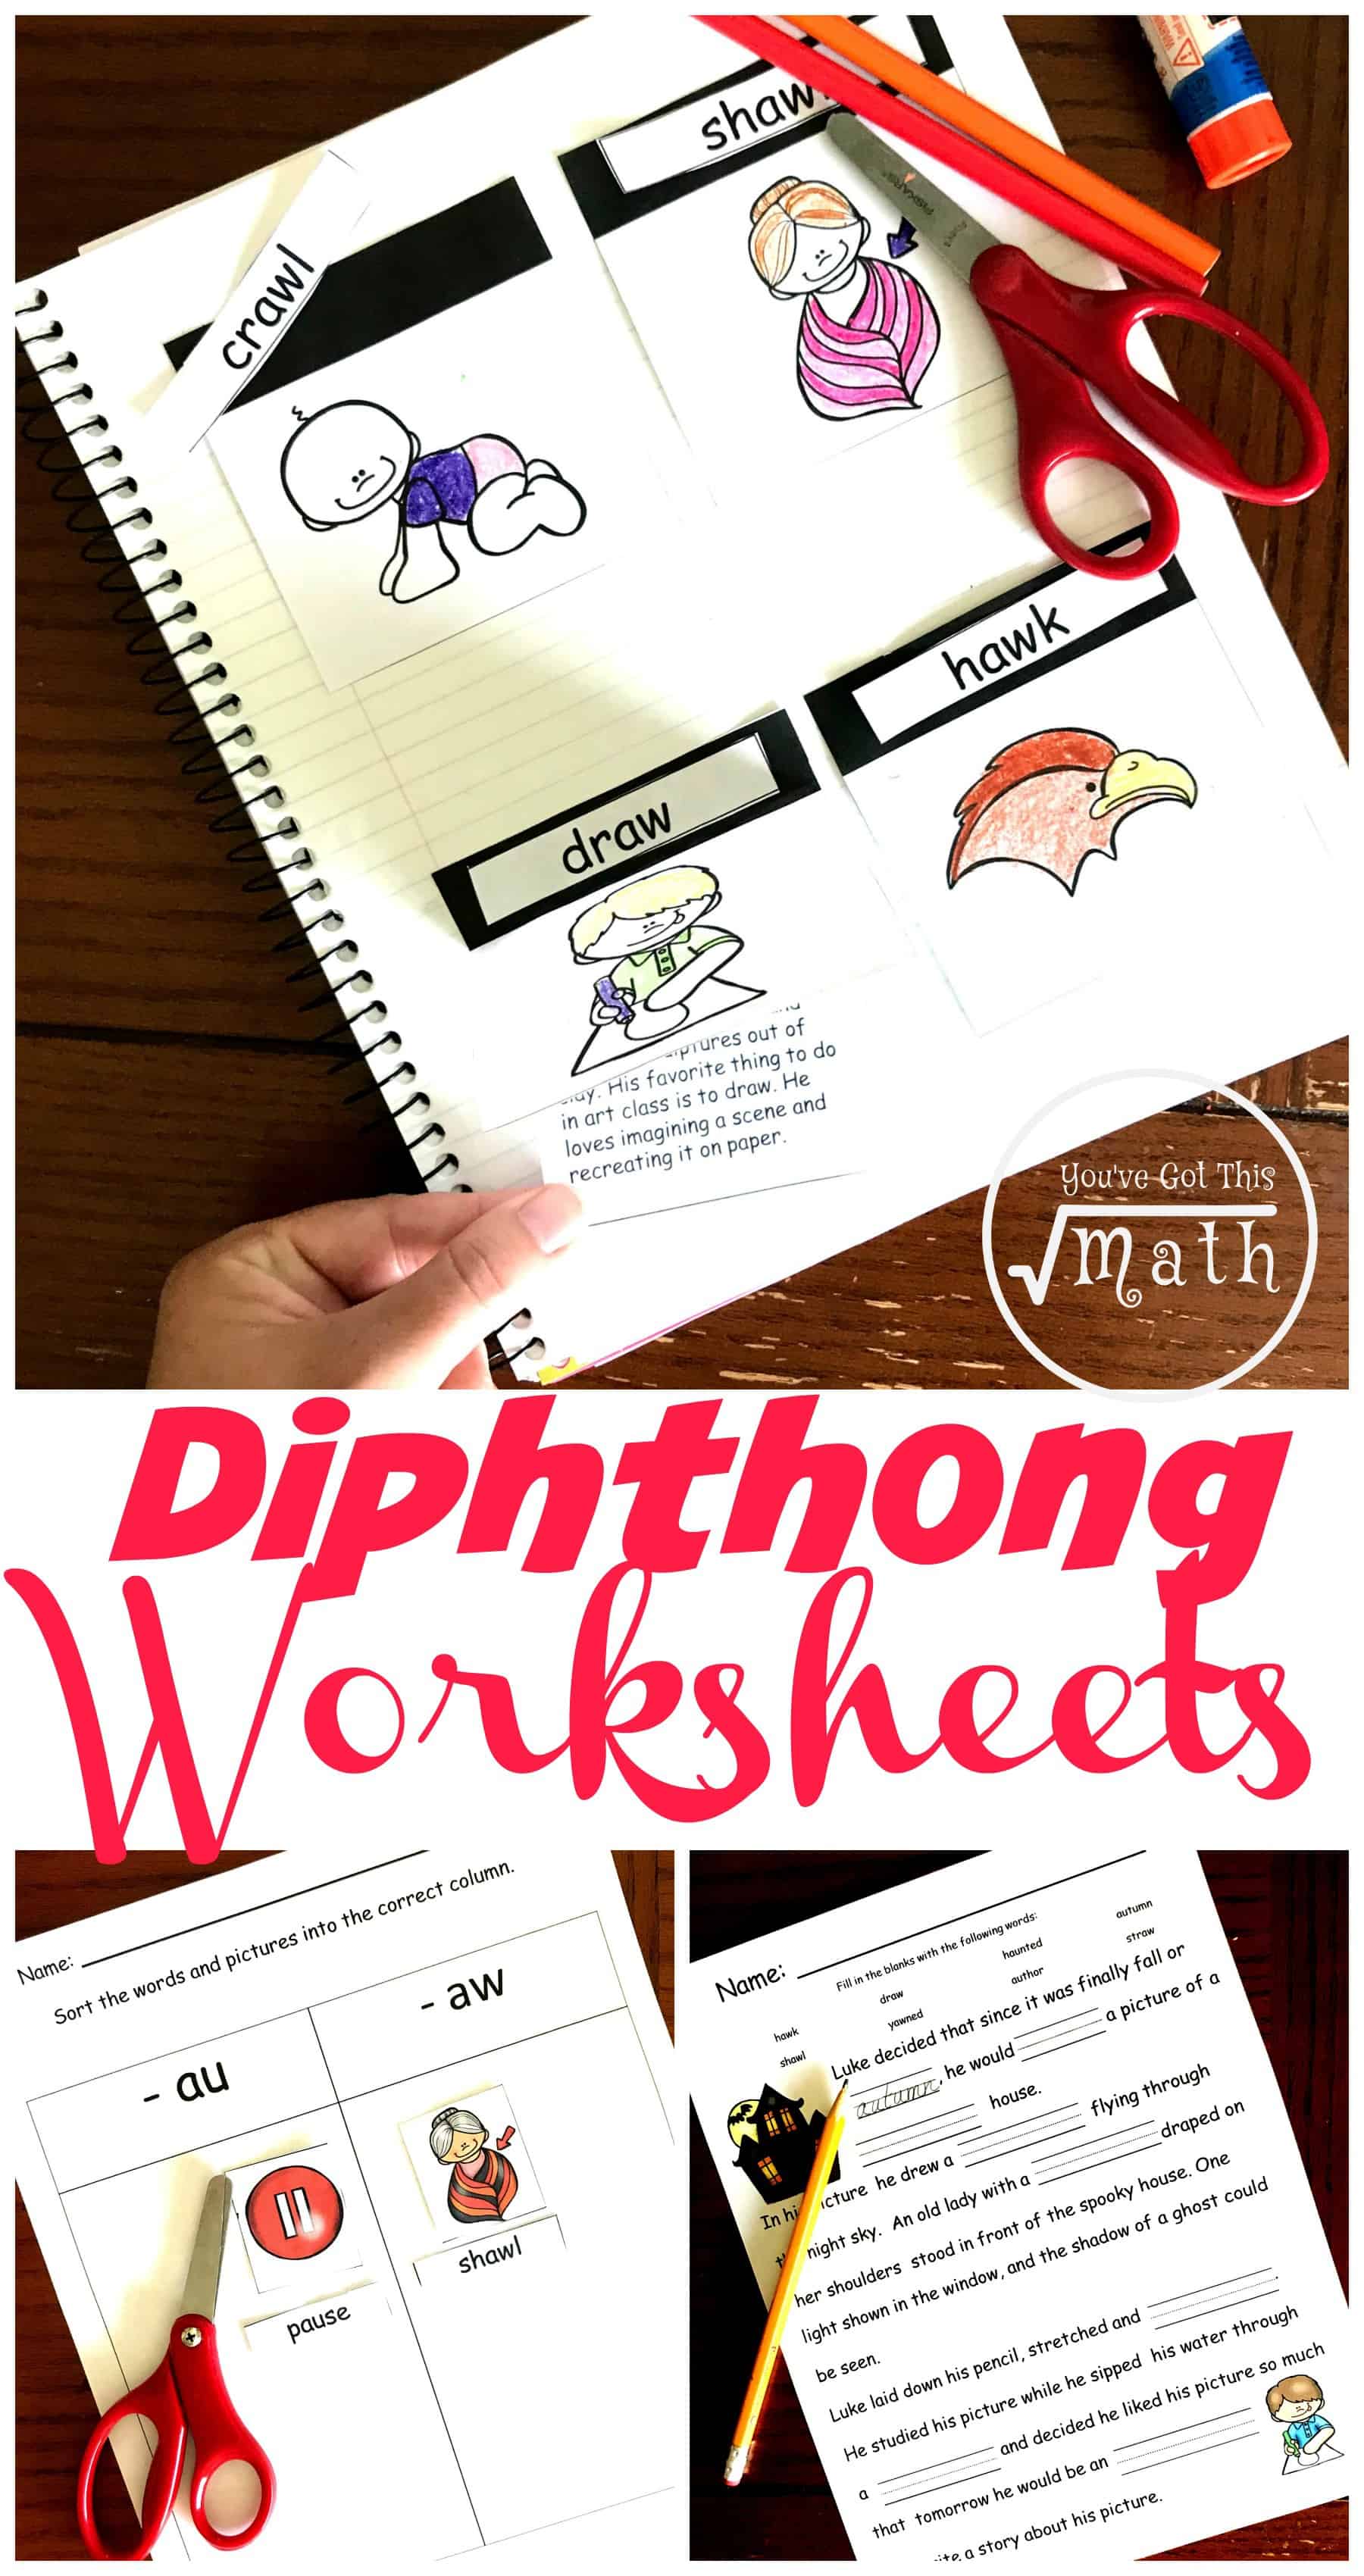 AU AW diphthong worksheets with pictures colored and glued to a notebook. 